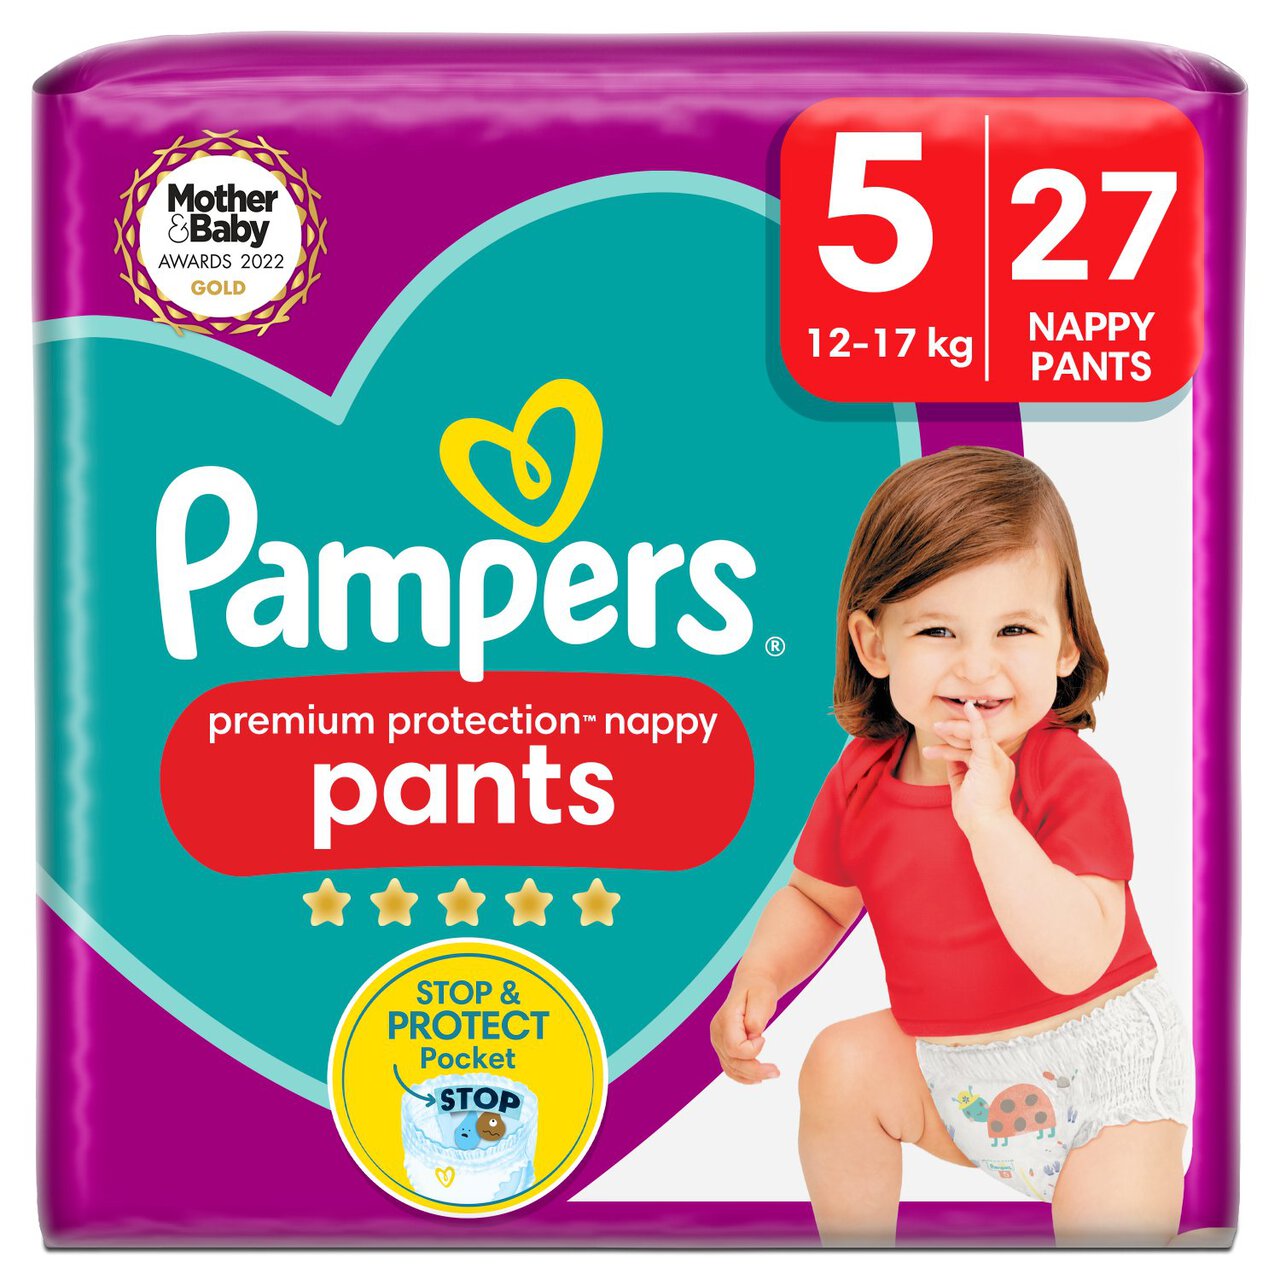 Pampers Premium Protection Nappy Pants, Size 5 (12-17kg) Essential Pack 27 per pack